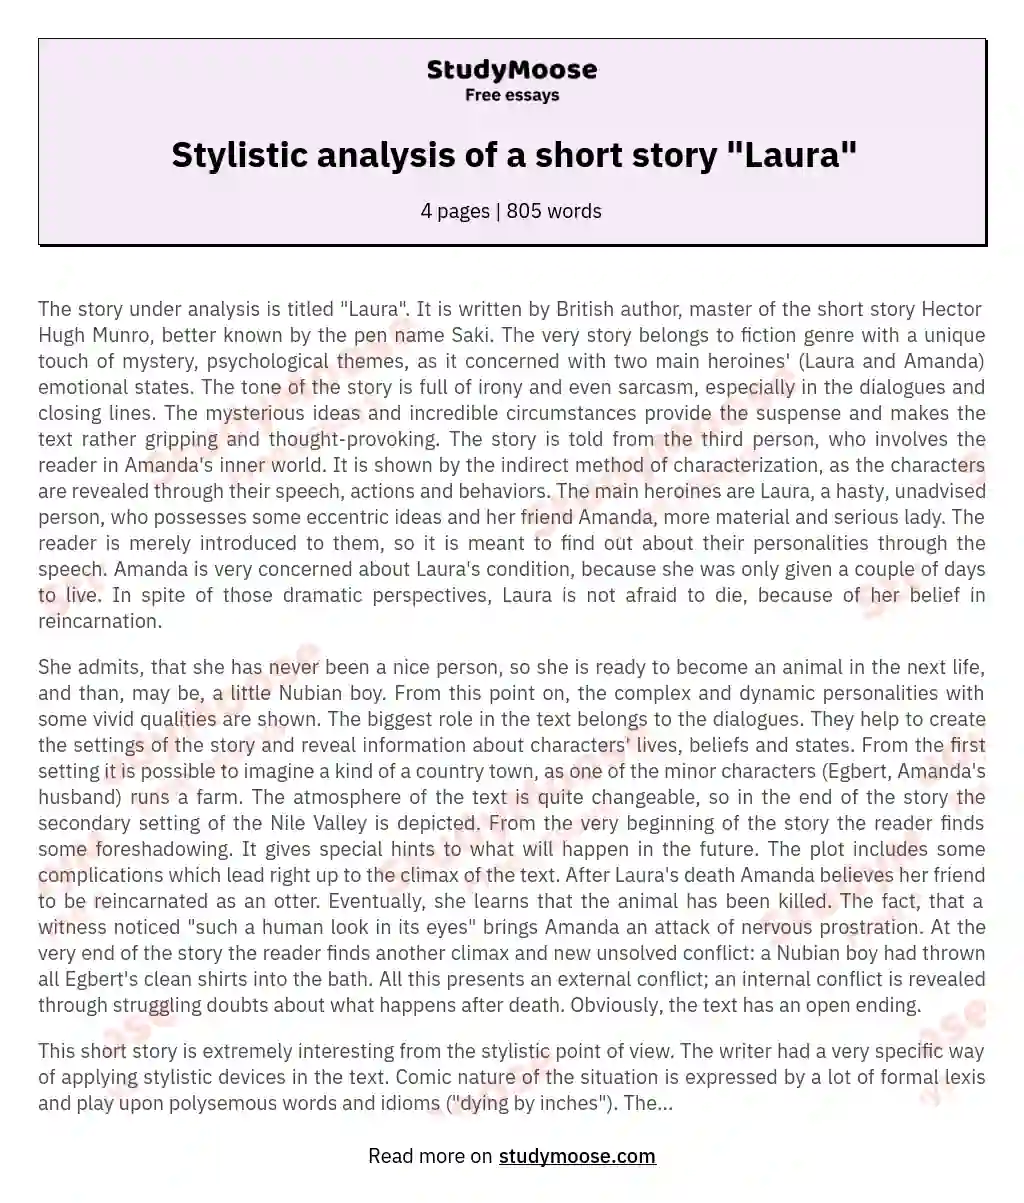 Stylistic analysis of a short story "Laura"